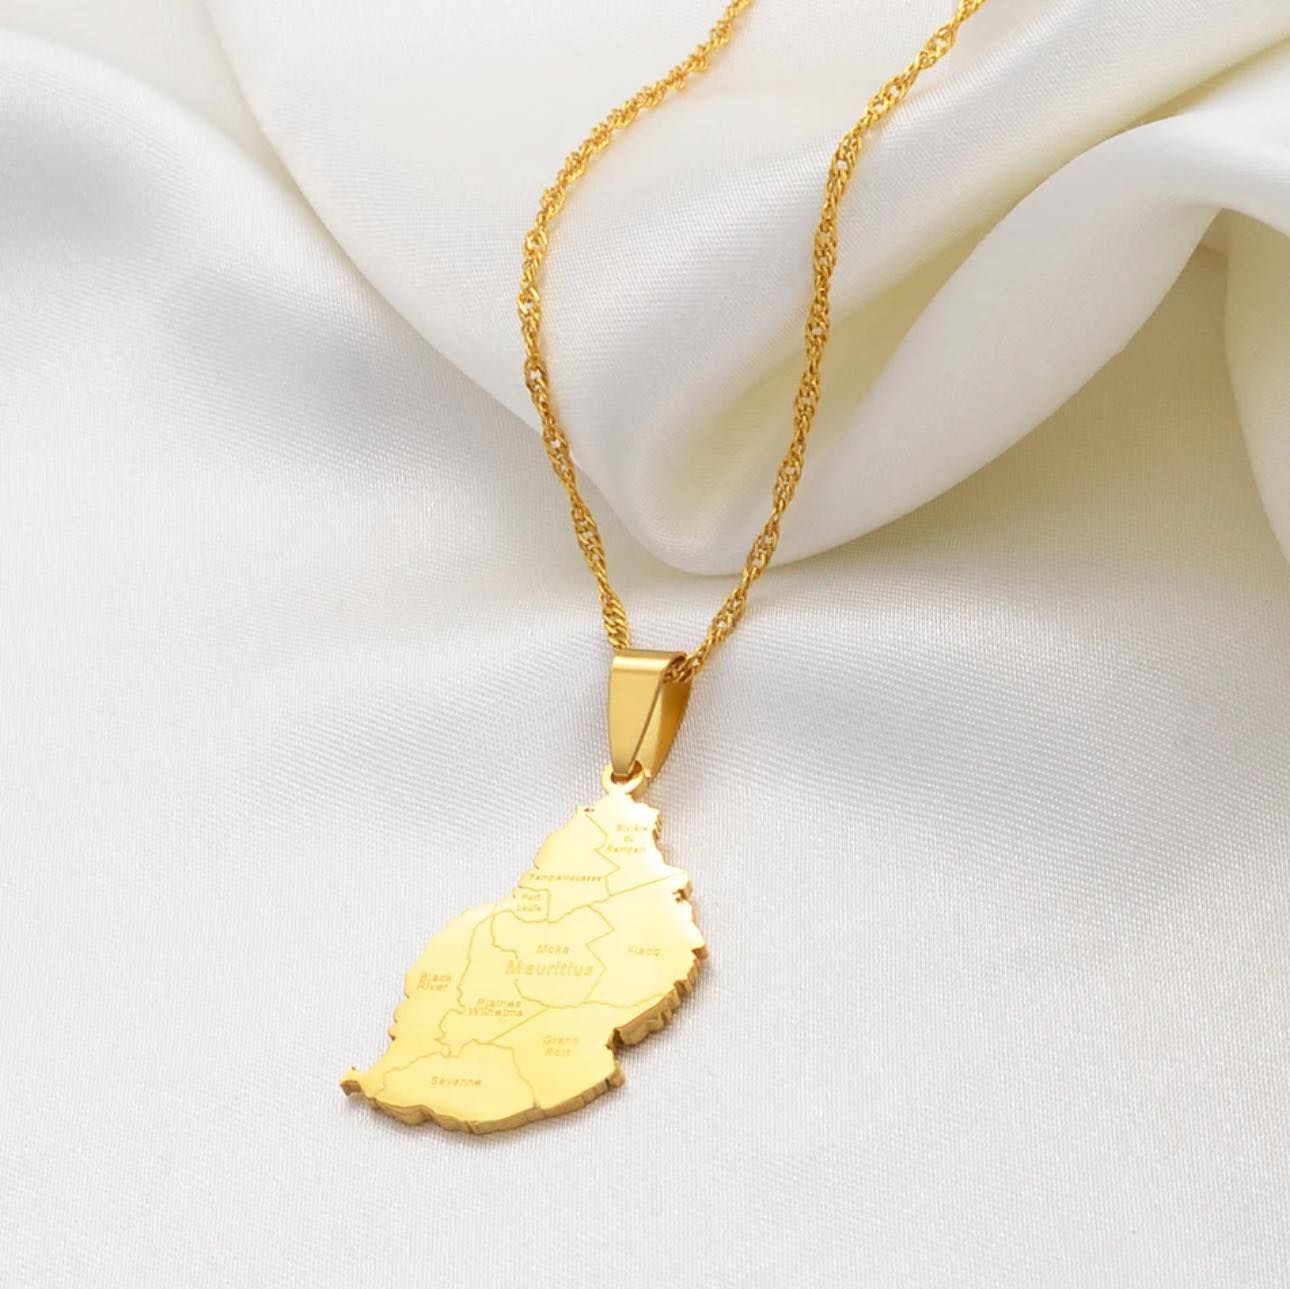 Mauritius Map & Cities Necklace